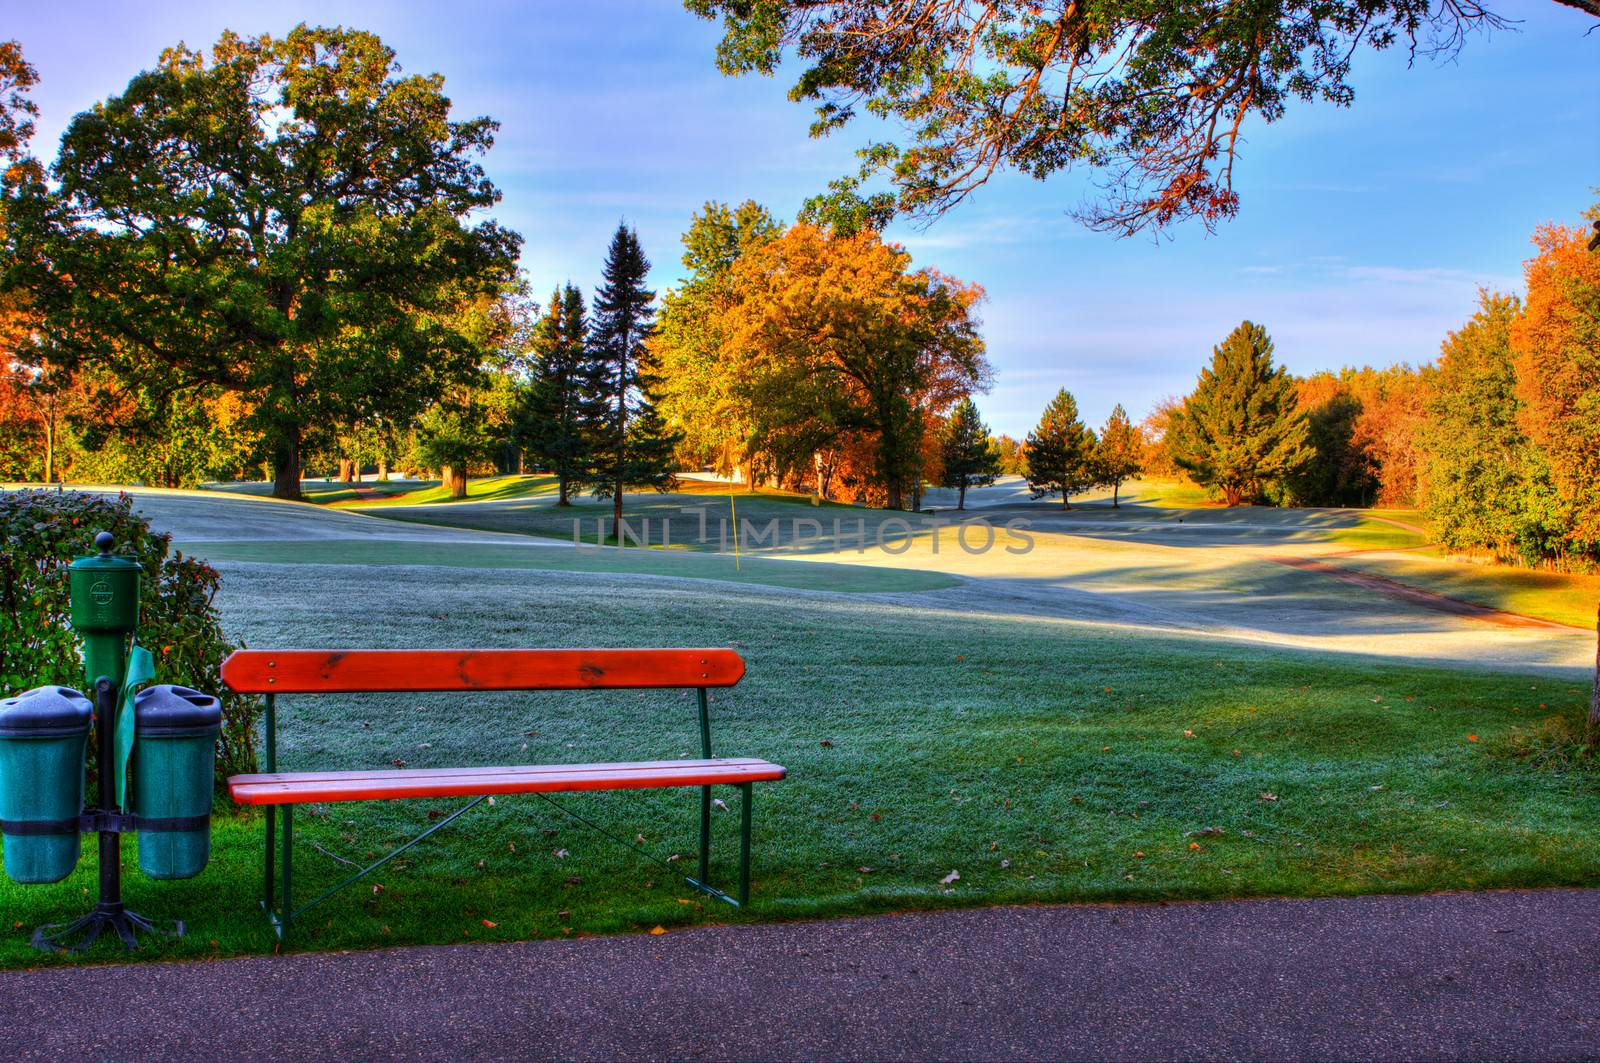 October's Fall Colors at the Golf Course.